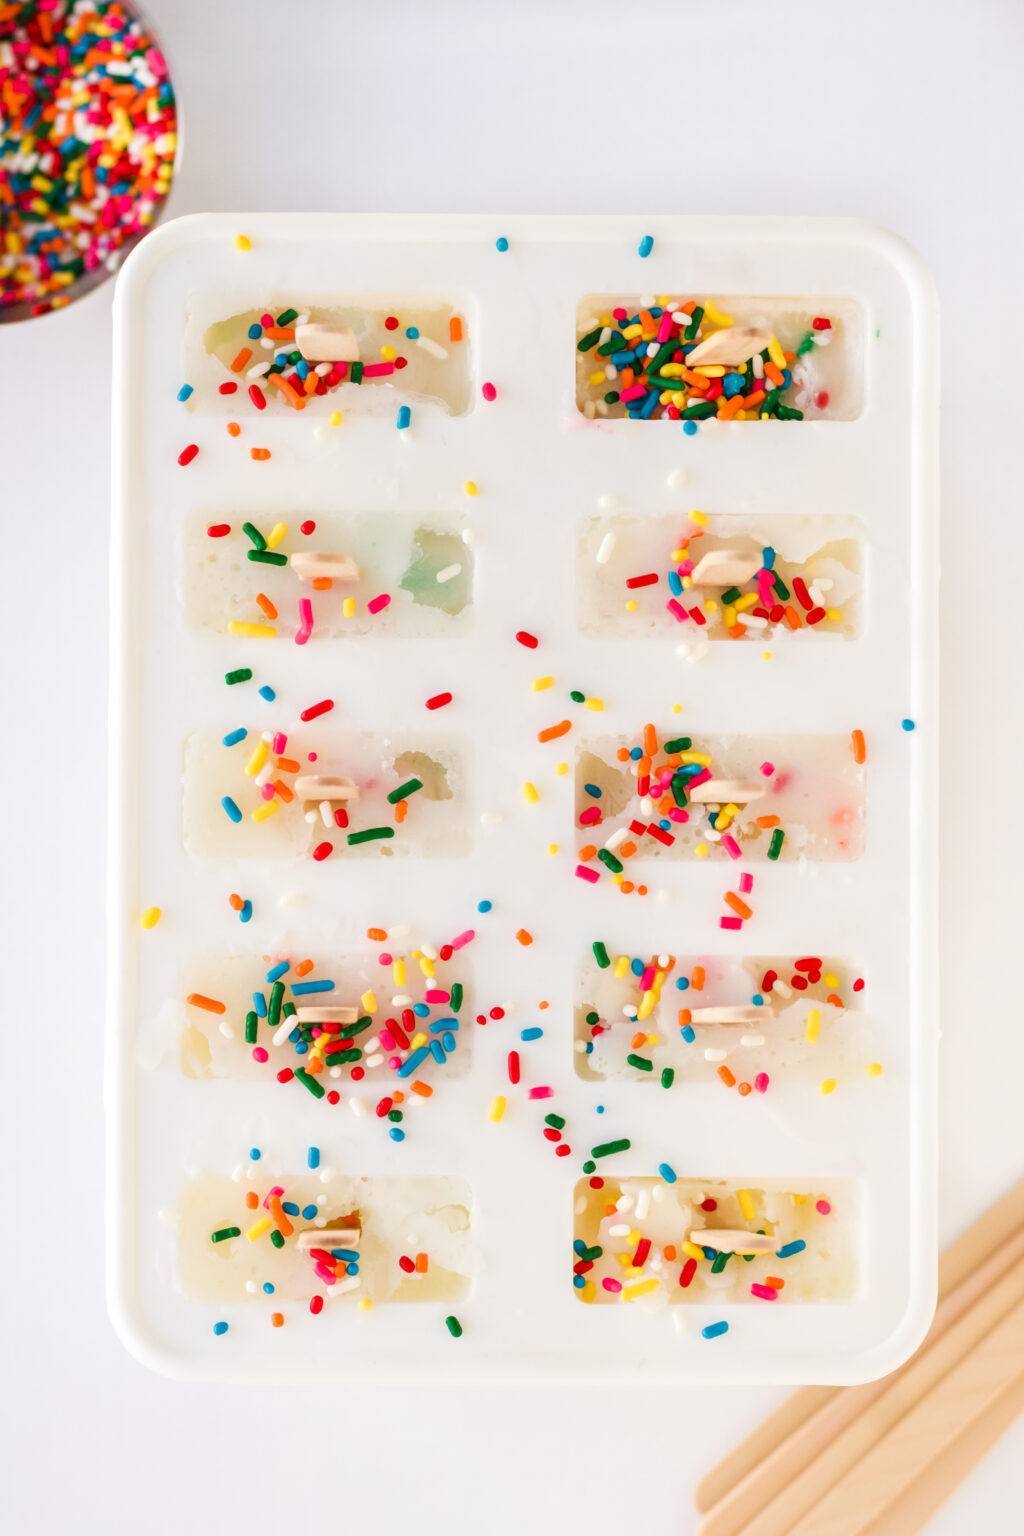 cake mix popsicles being made